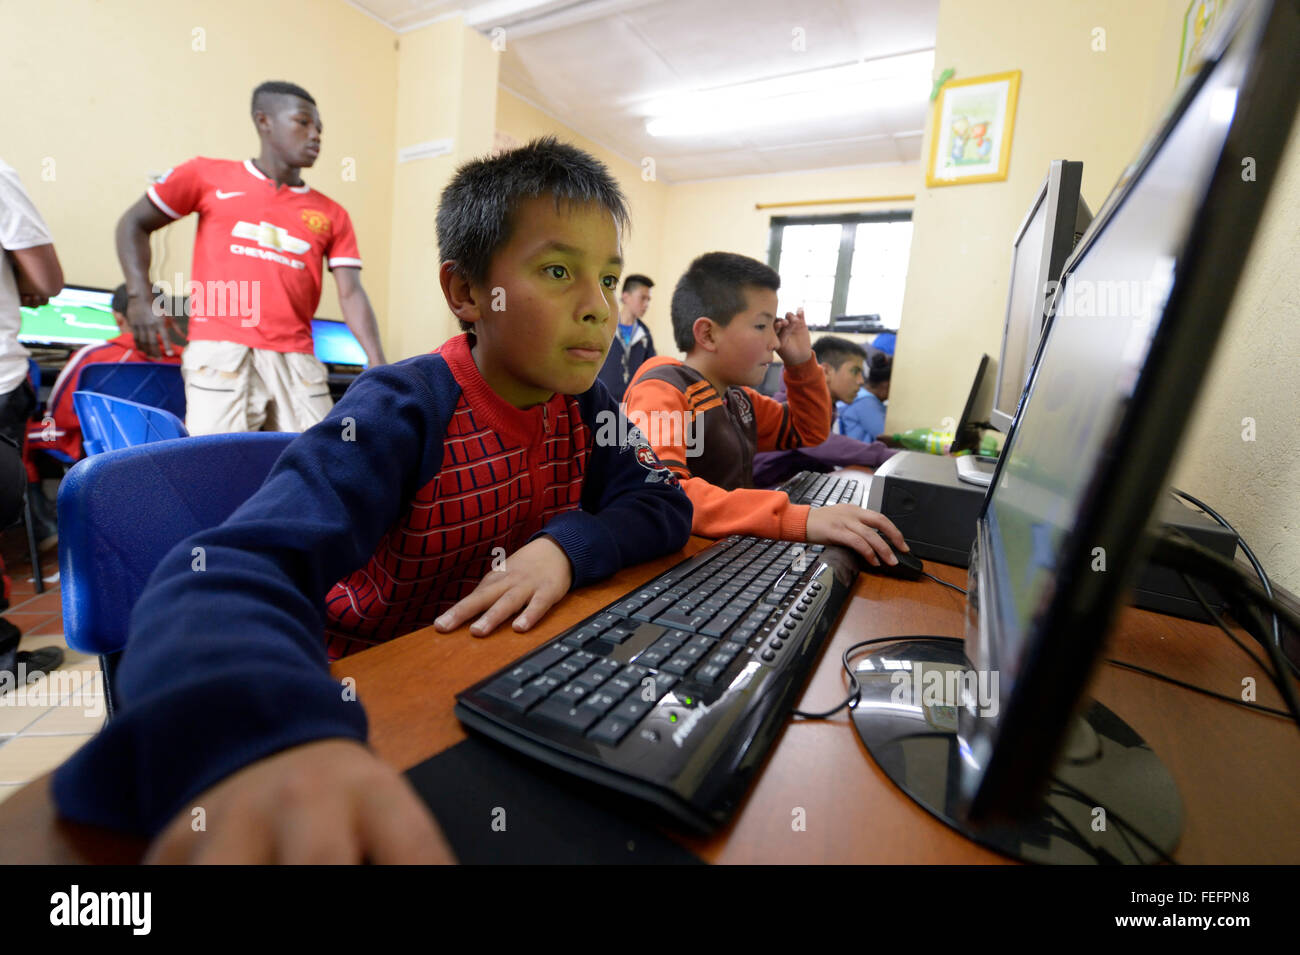 Boy at a computer, computer science lessons, social project, Bogota, Colombia Stock Photo